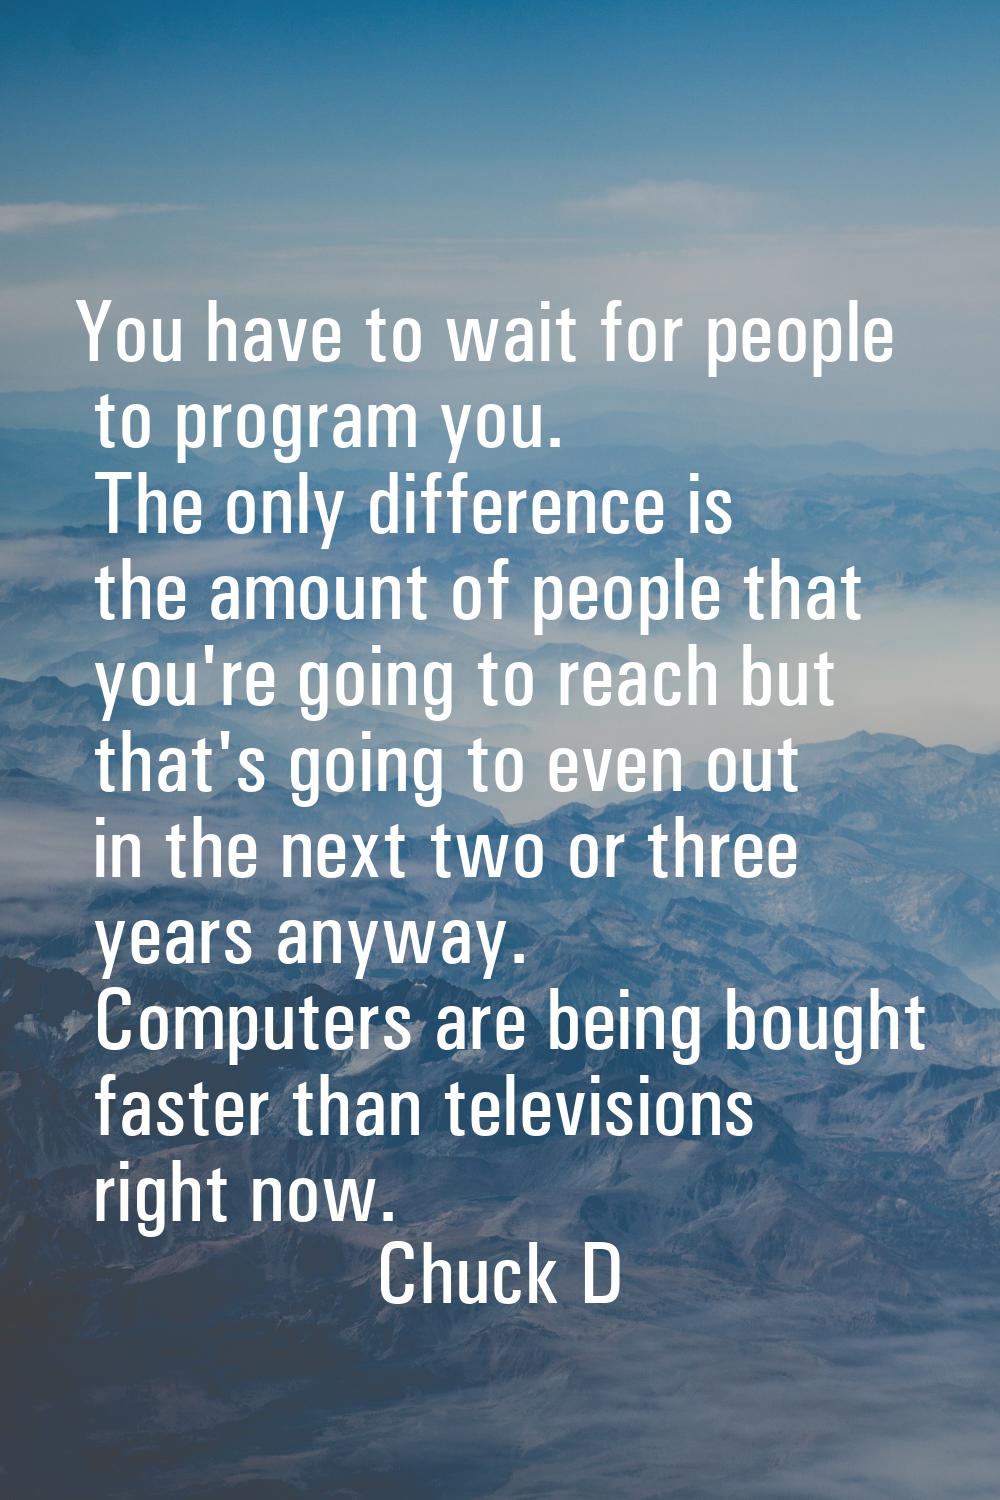 You have to wait for people to program you. The only difference is the amount of people that you're